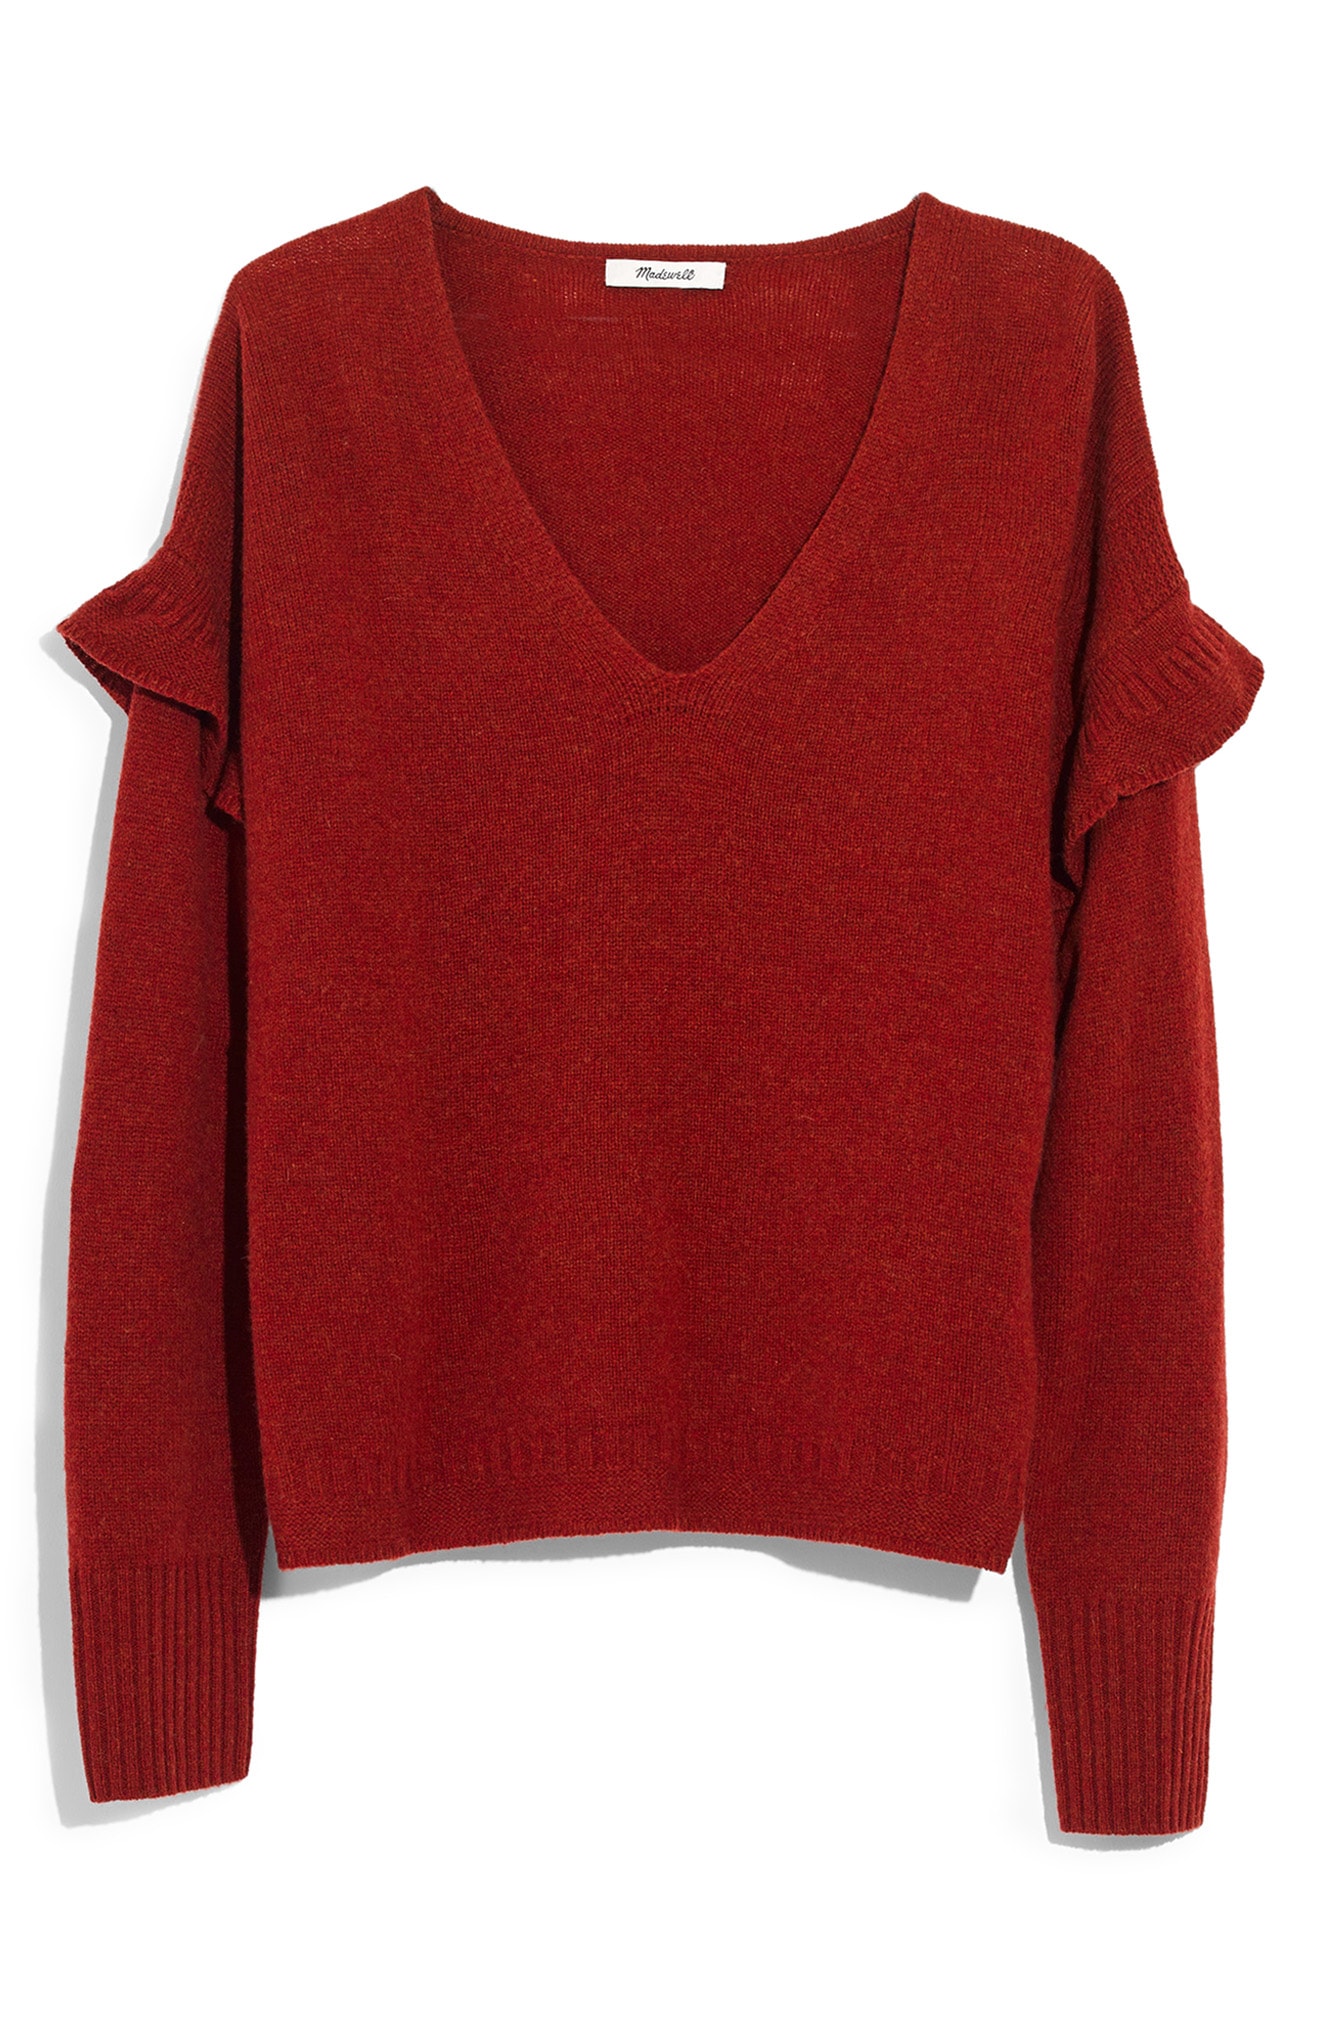 Madewell Ruffle Stitch Play Pullover Sweater